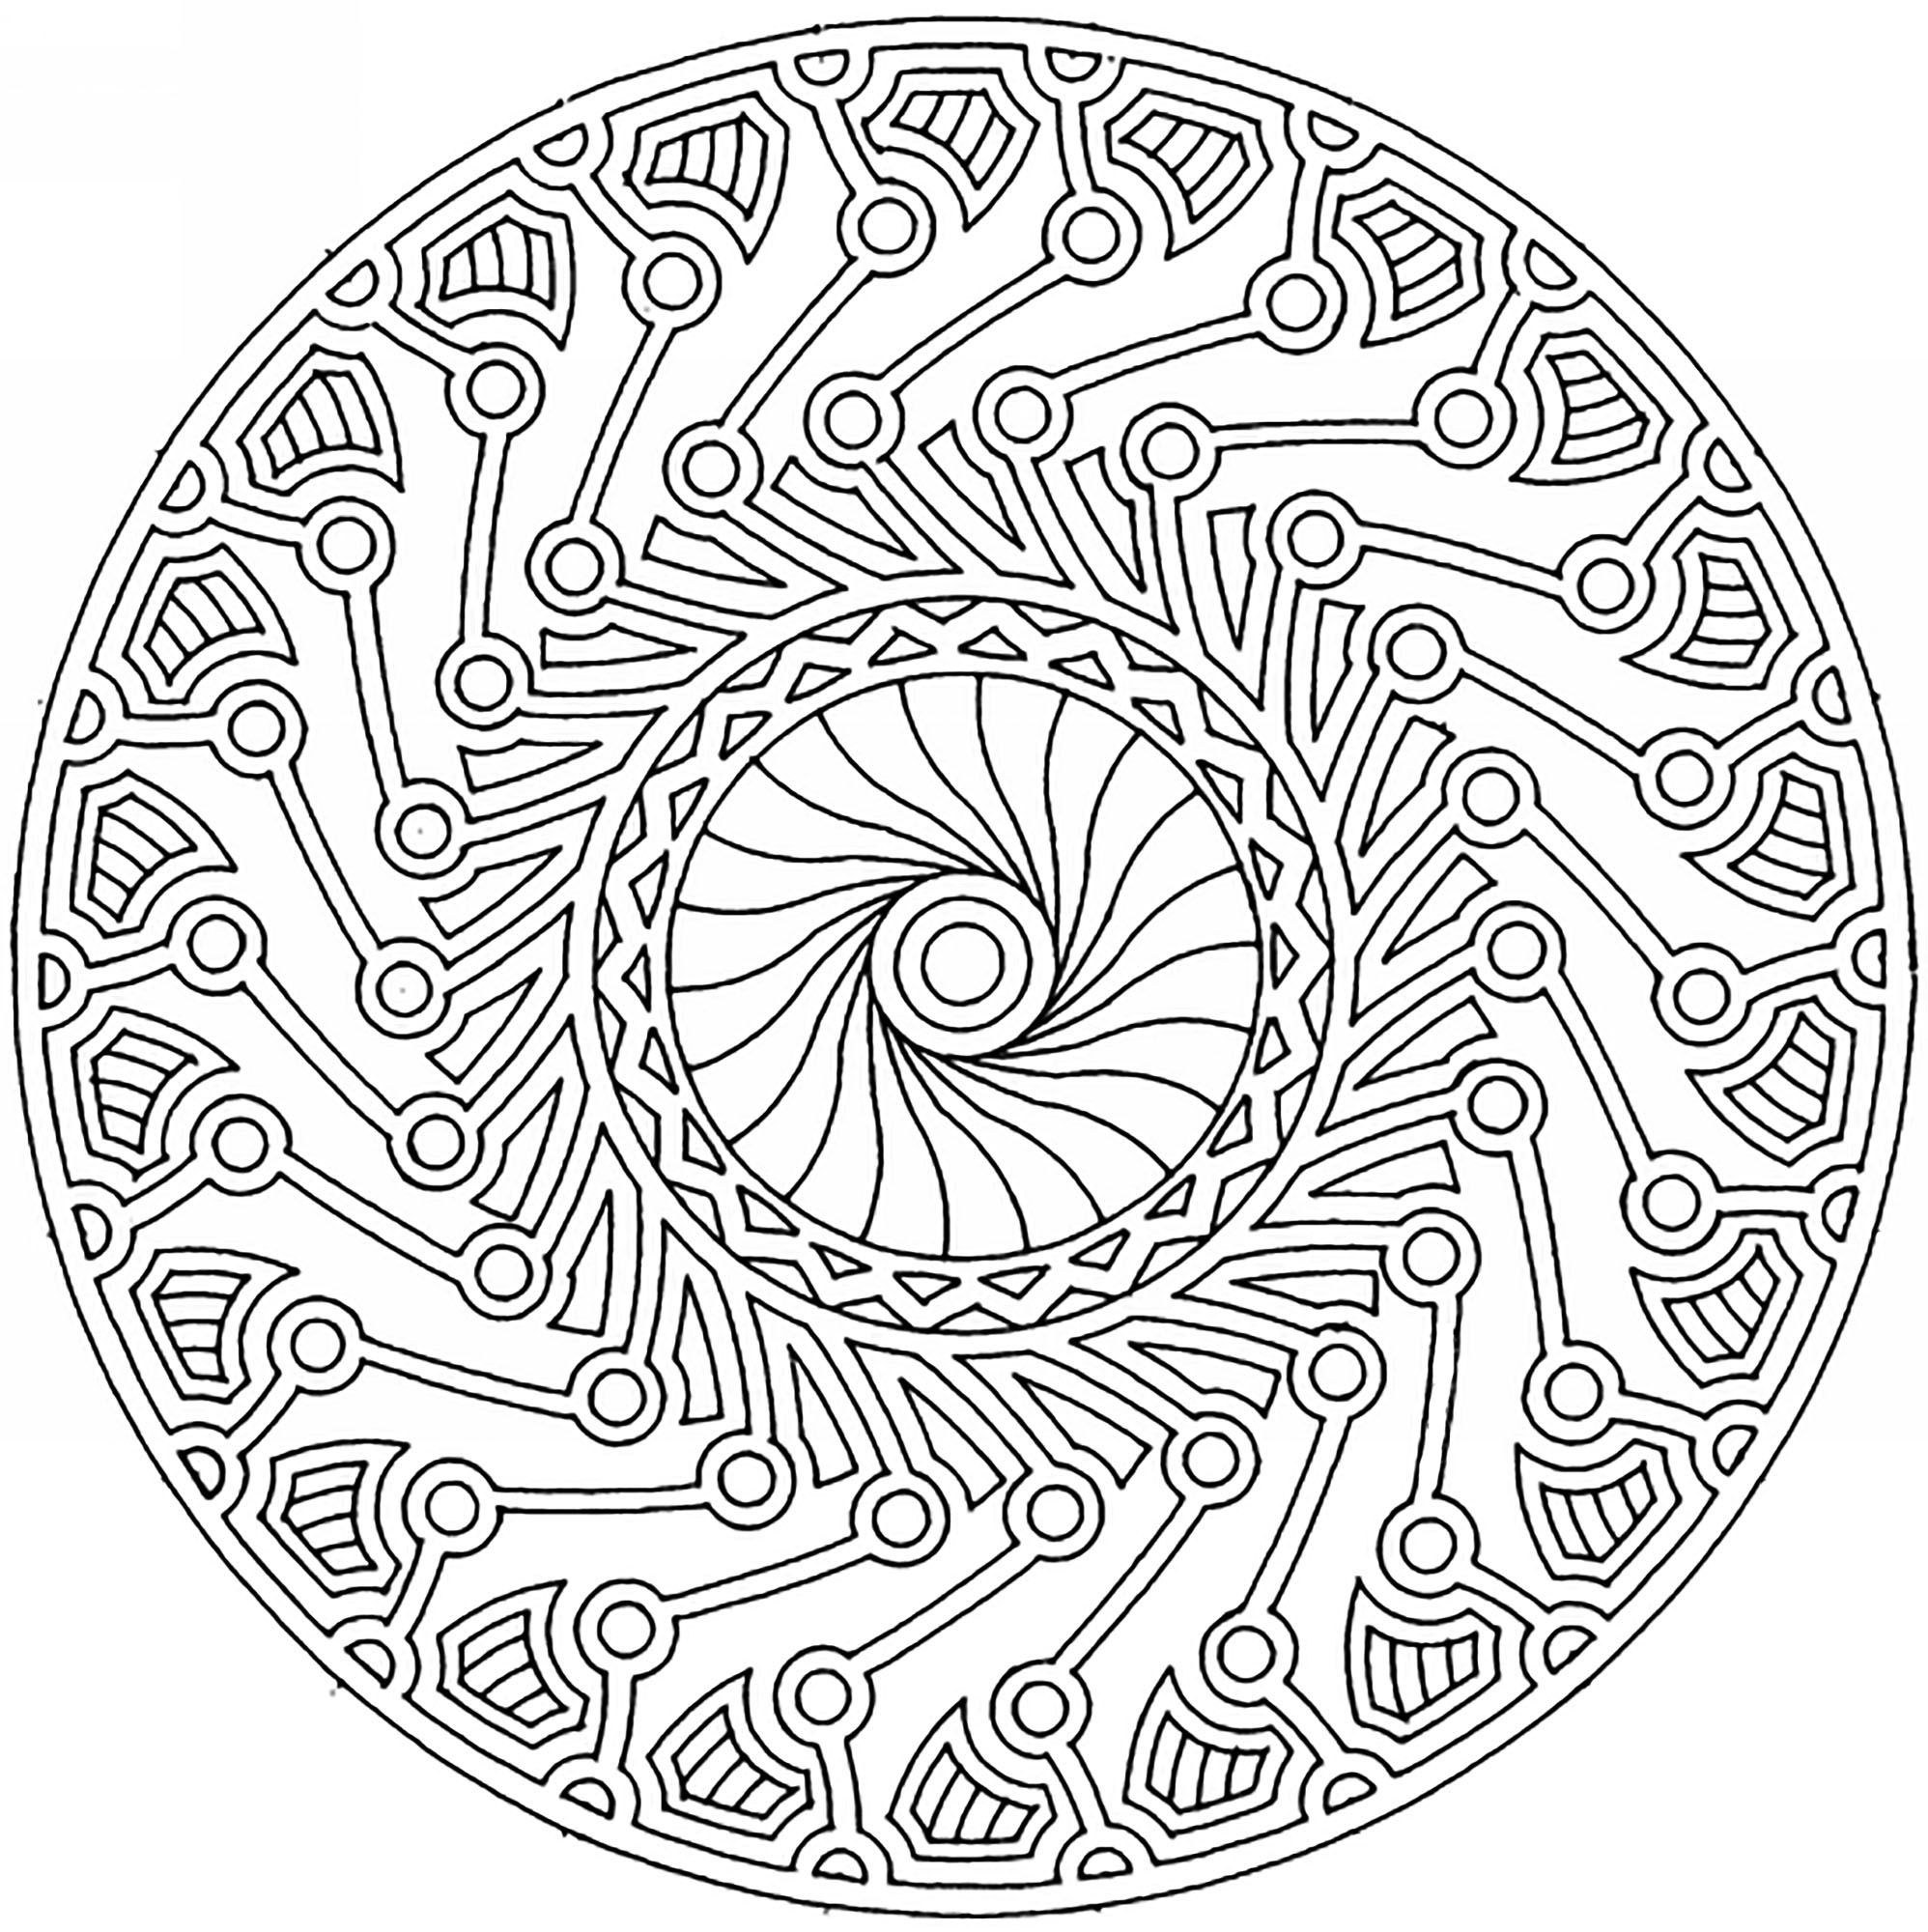 Mandala Coloring Pages Free Online Mandala Harmony And Complexity Malas Adult Coloring Pages